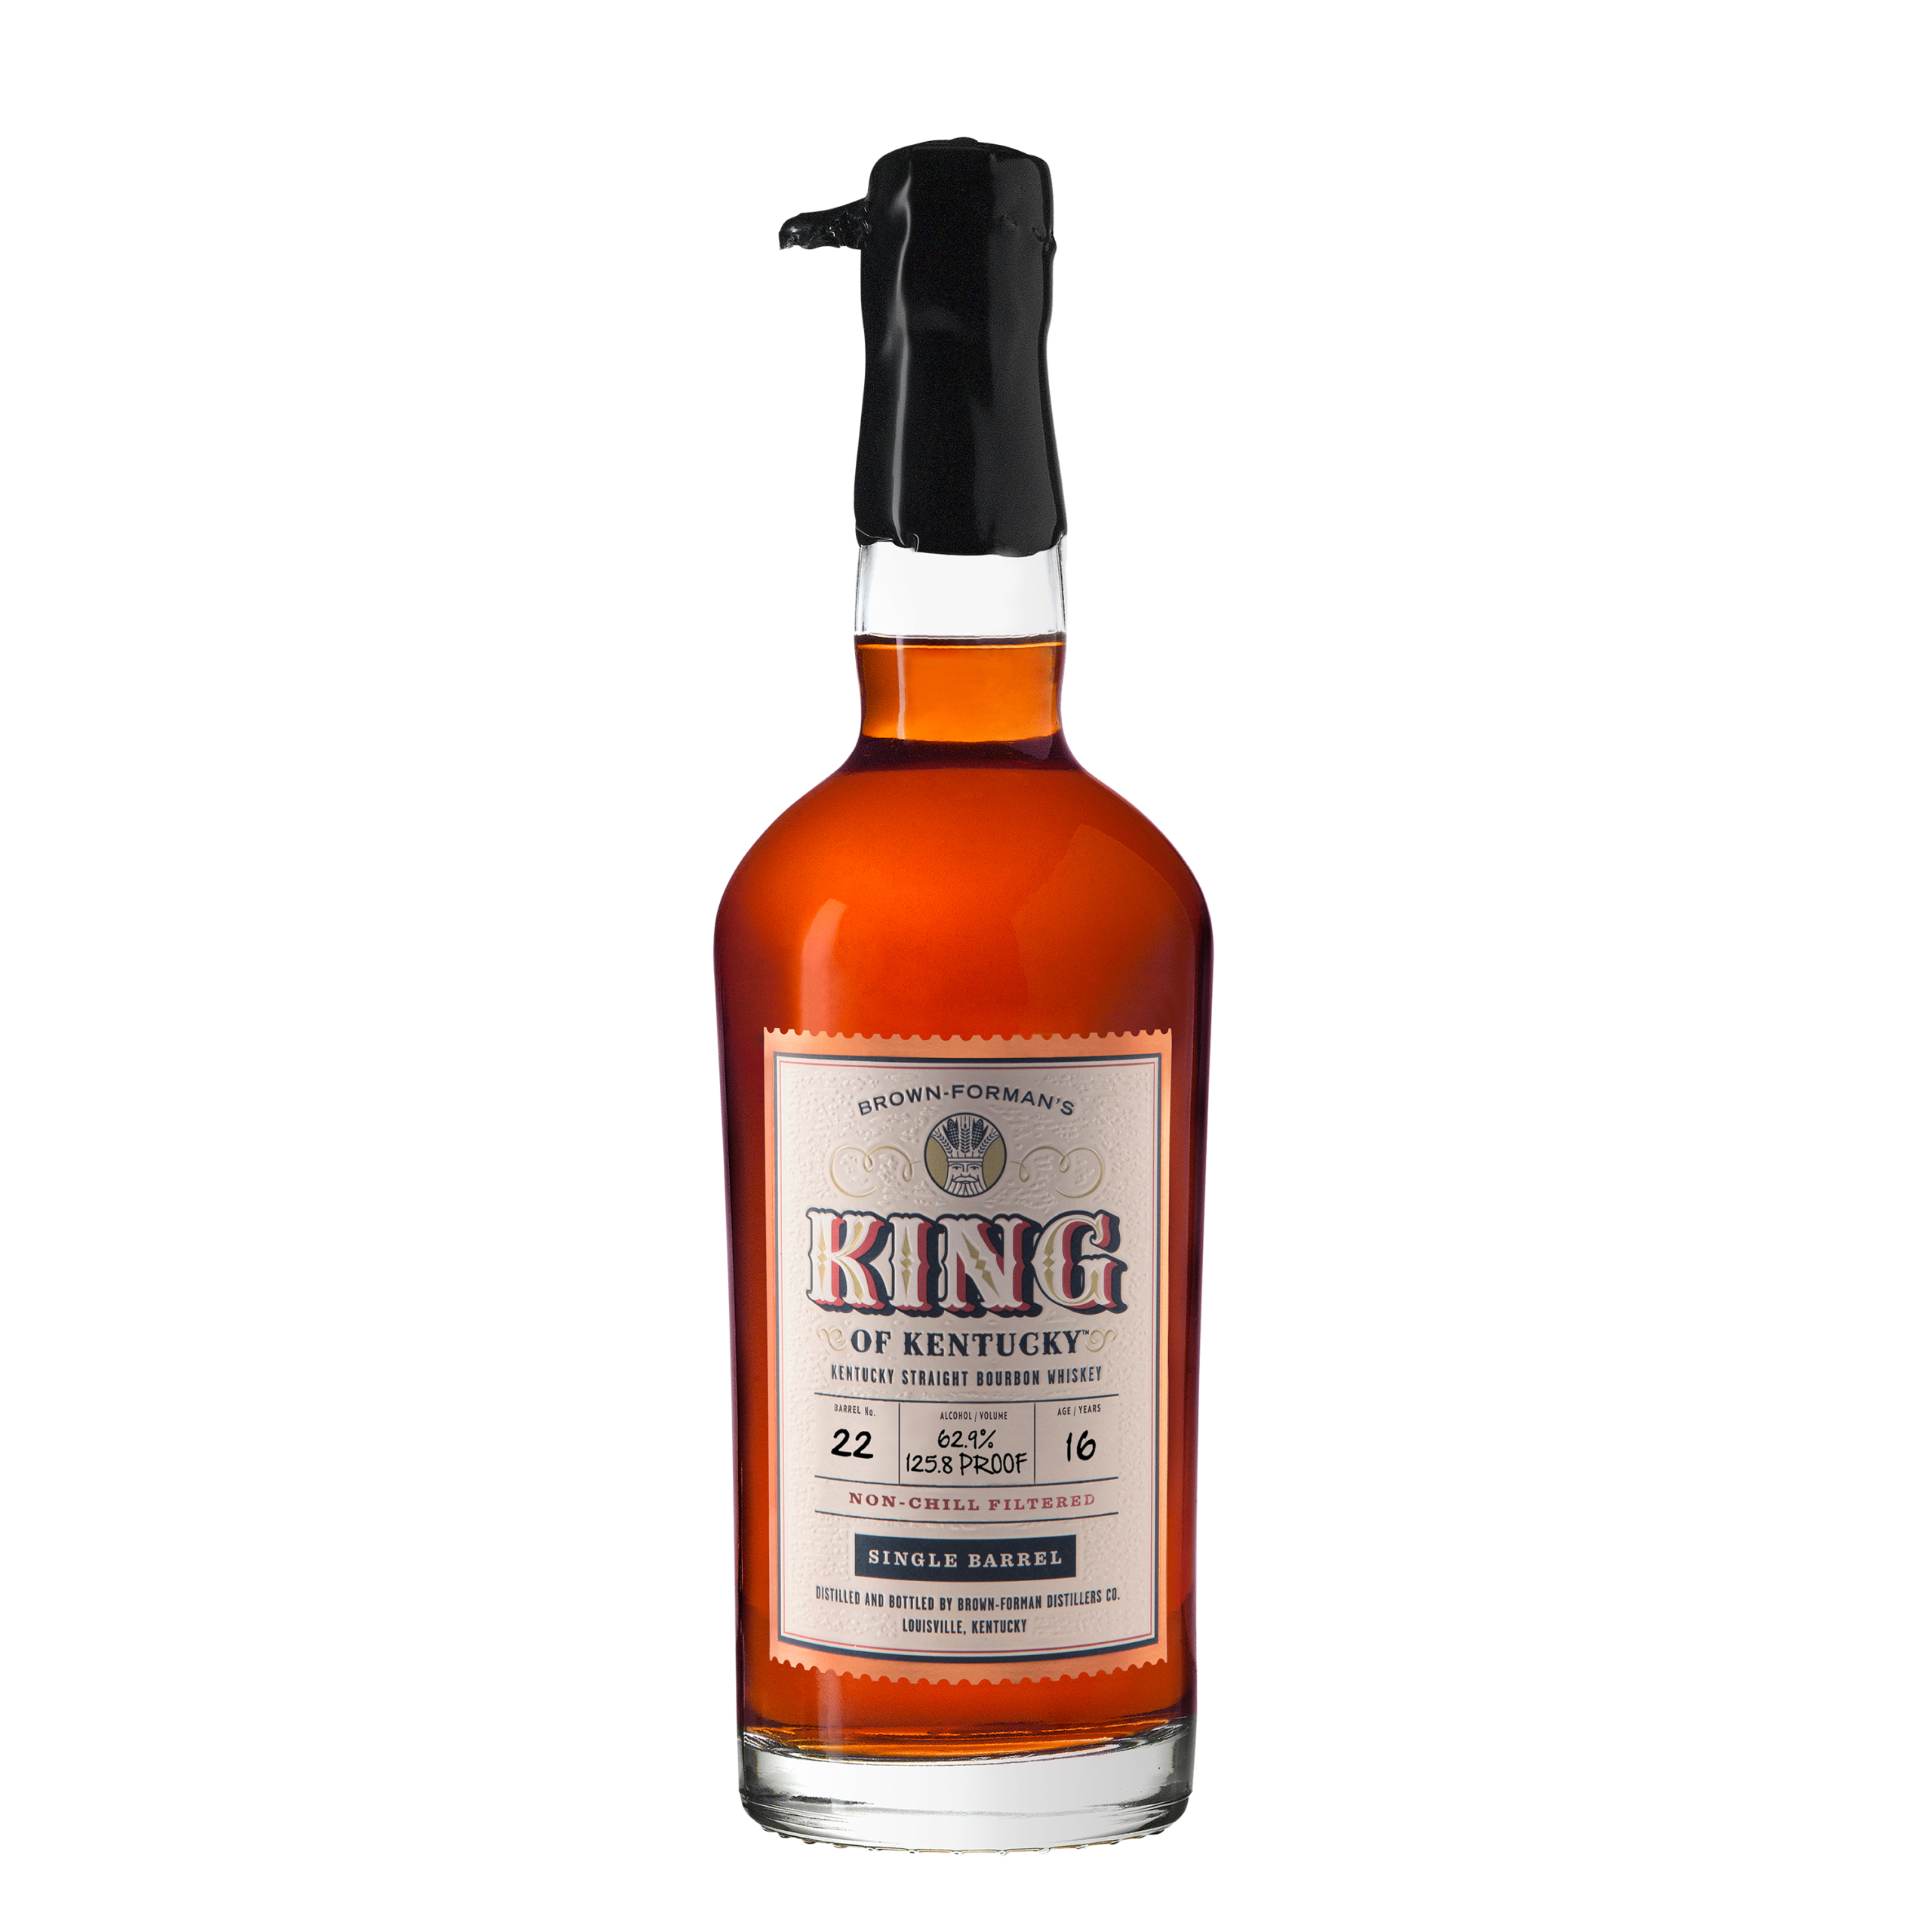 King of Kentucky Bourbon Releases Sixth Edition: 16-Year old Release Hits Shelves This Fall